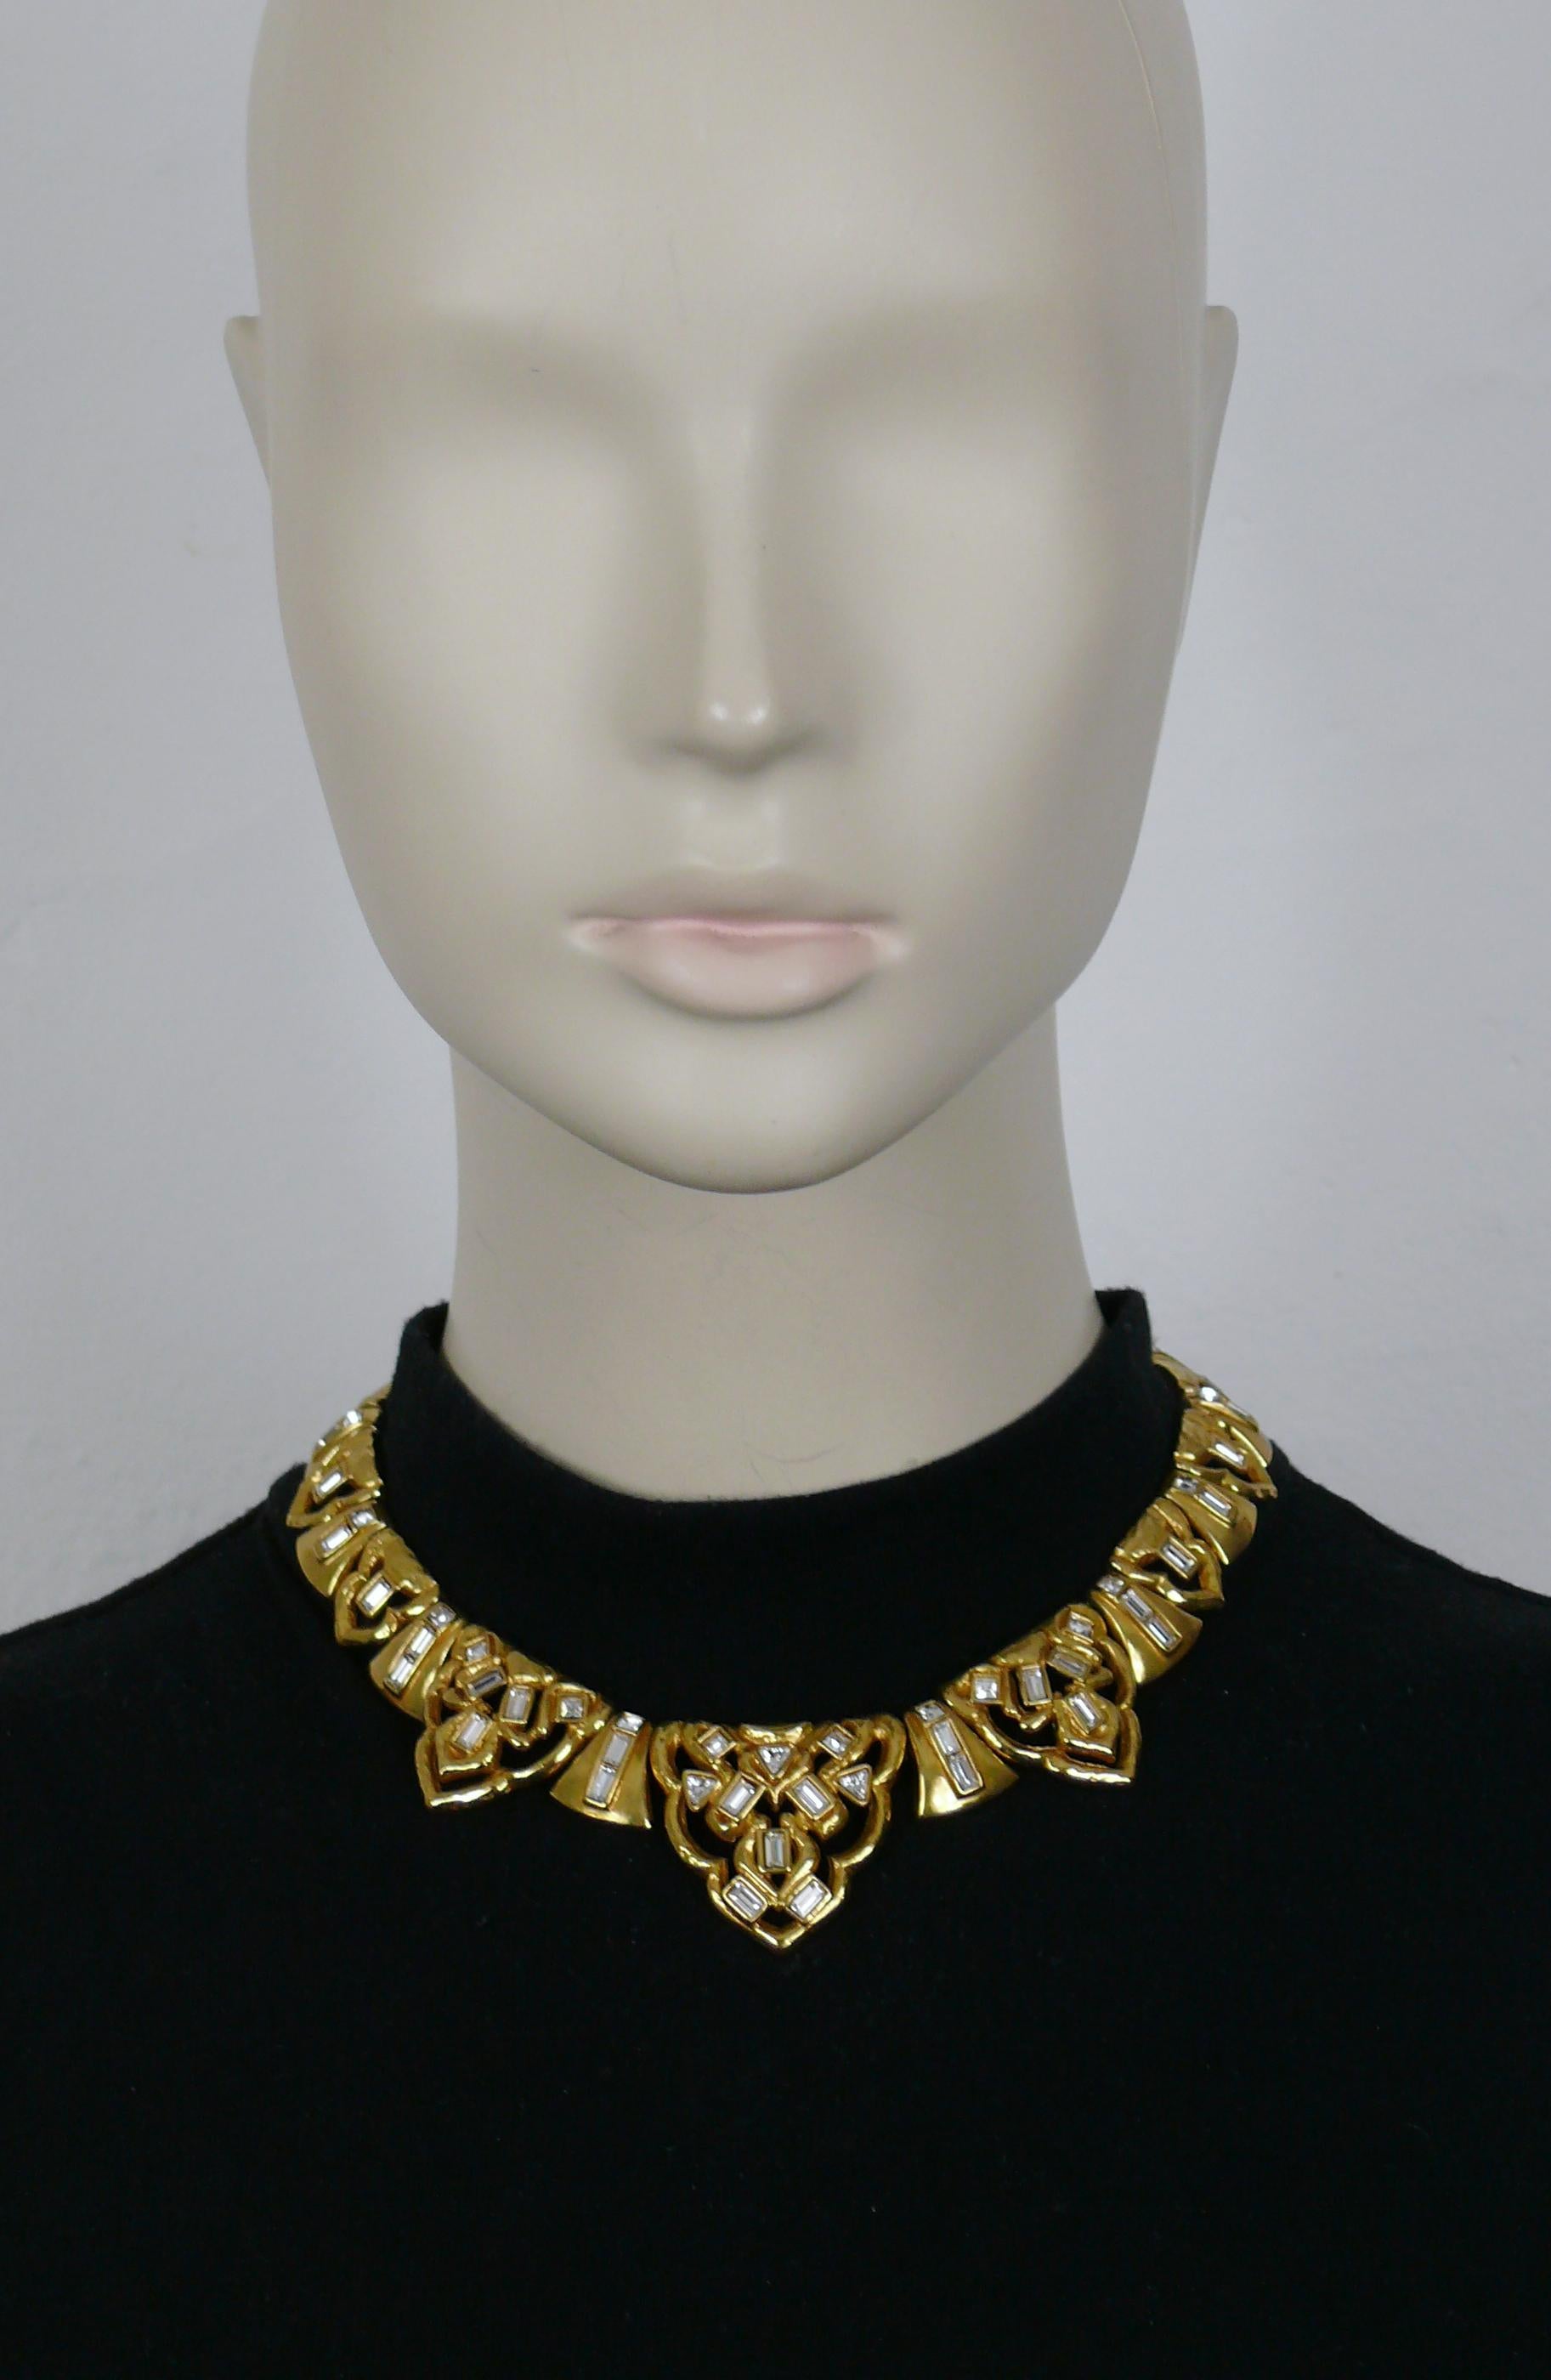 YVES SAINT LAURENT vintage gold tone oriental design link necklace embellished with clear crystals.

Adjustable spring clasp closure.

Embossed YSL Made in France.

Indicative measurements : adjustable circumference from approx. 36.12 cm (14.22